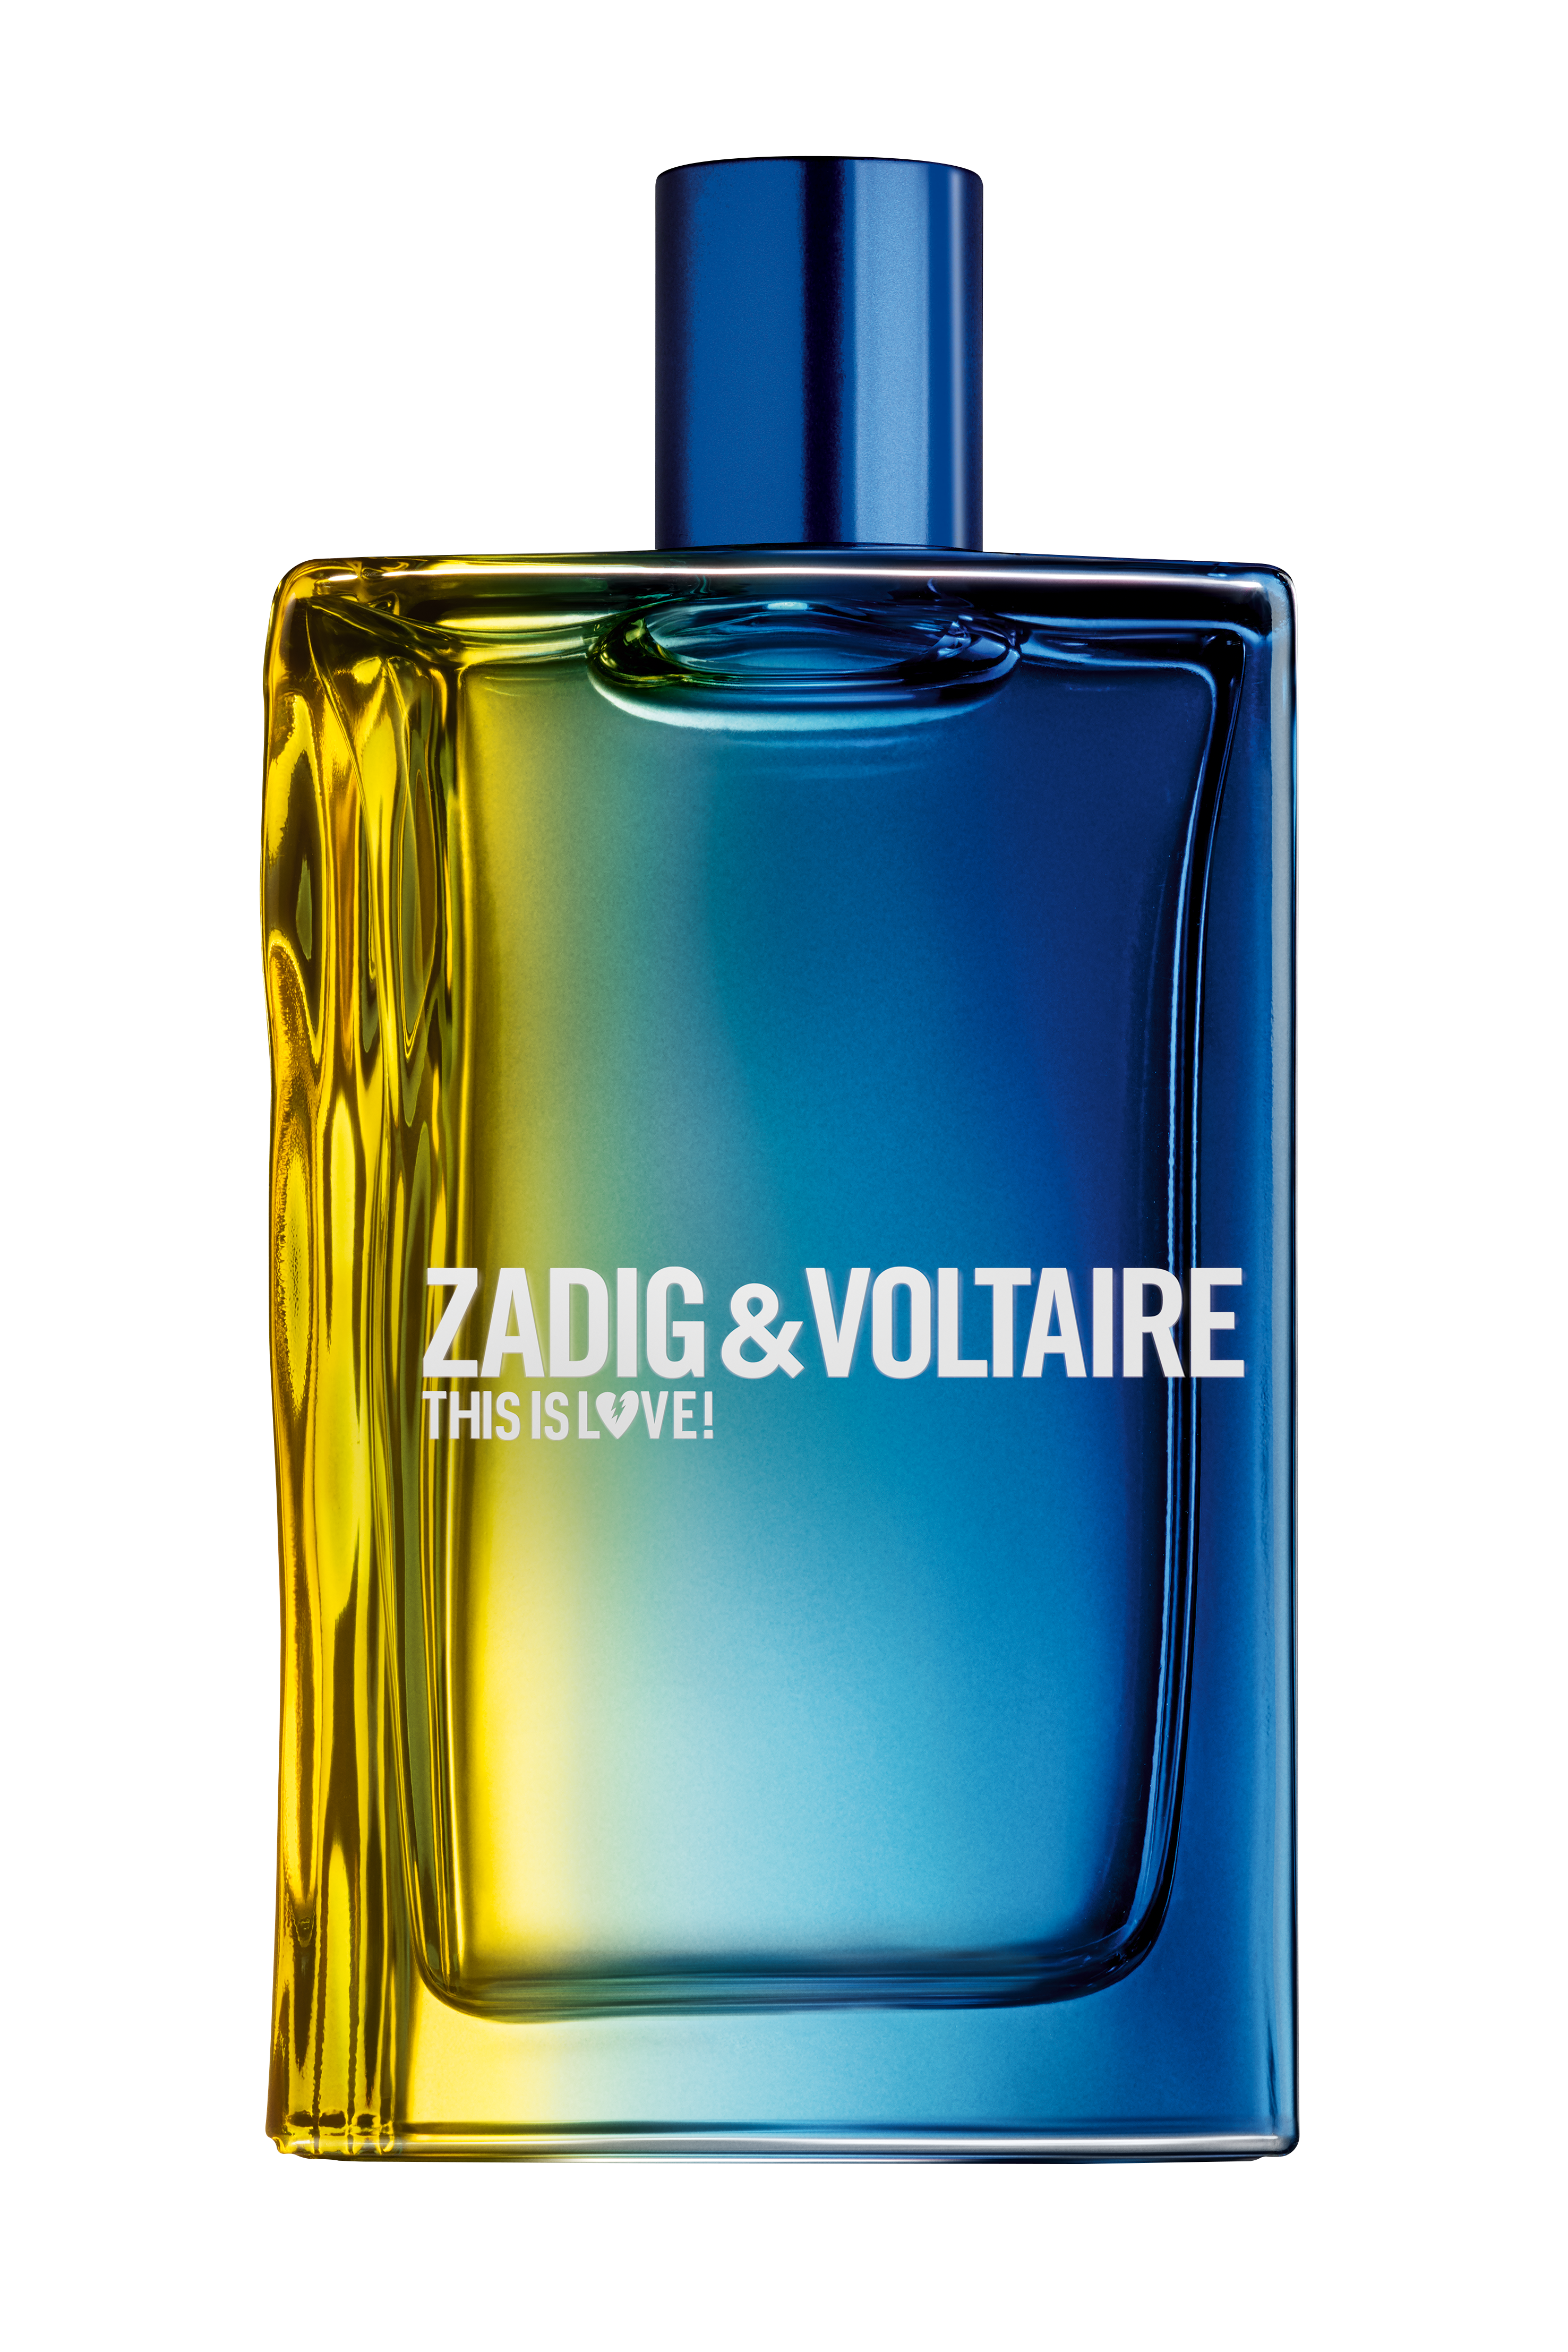 Z&V This is love - For him EDT 100ml